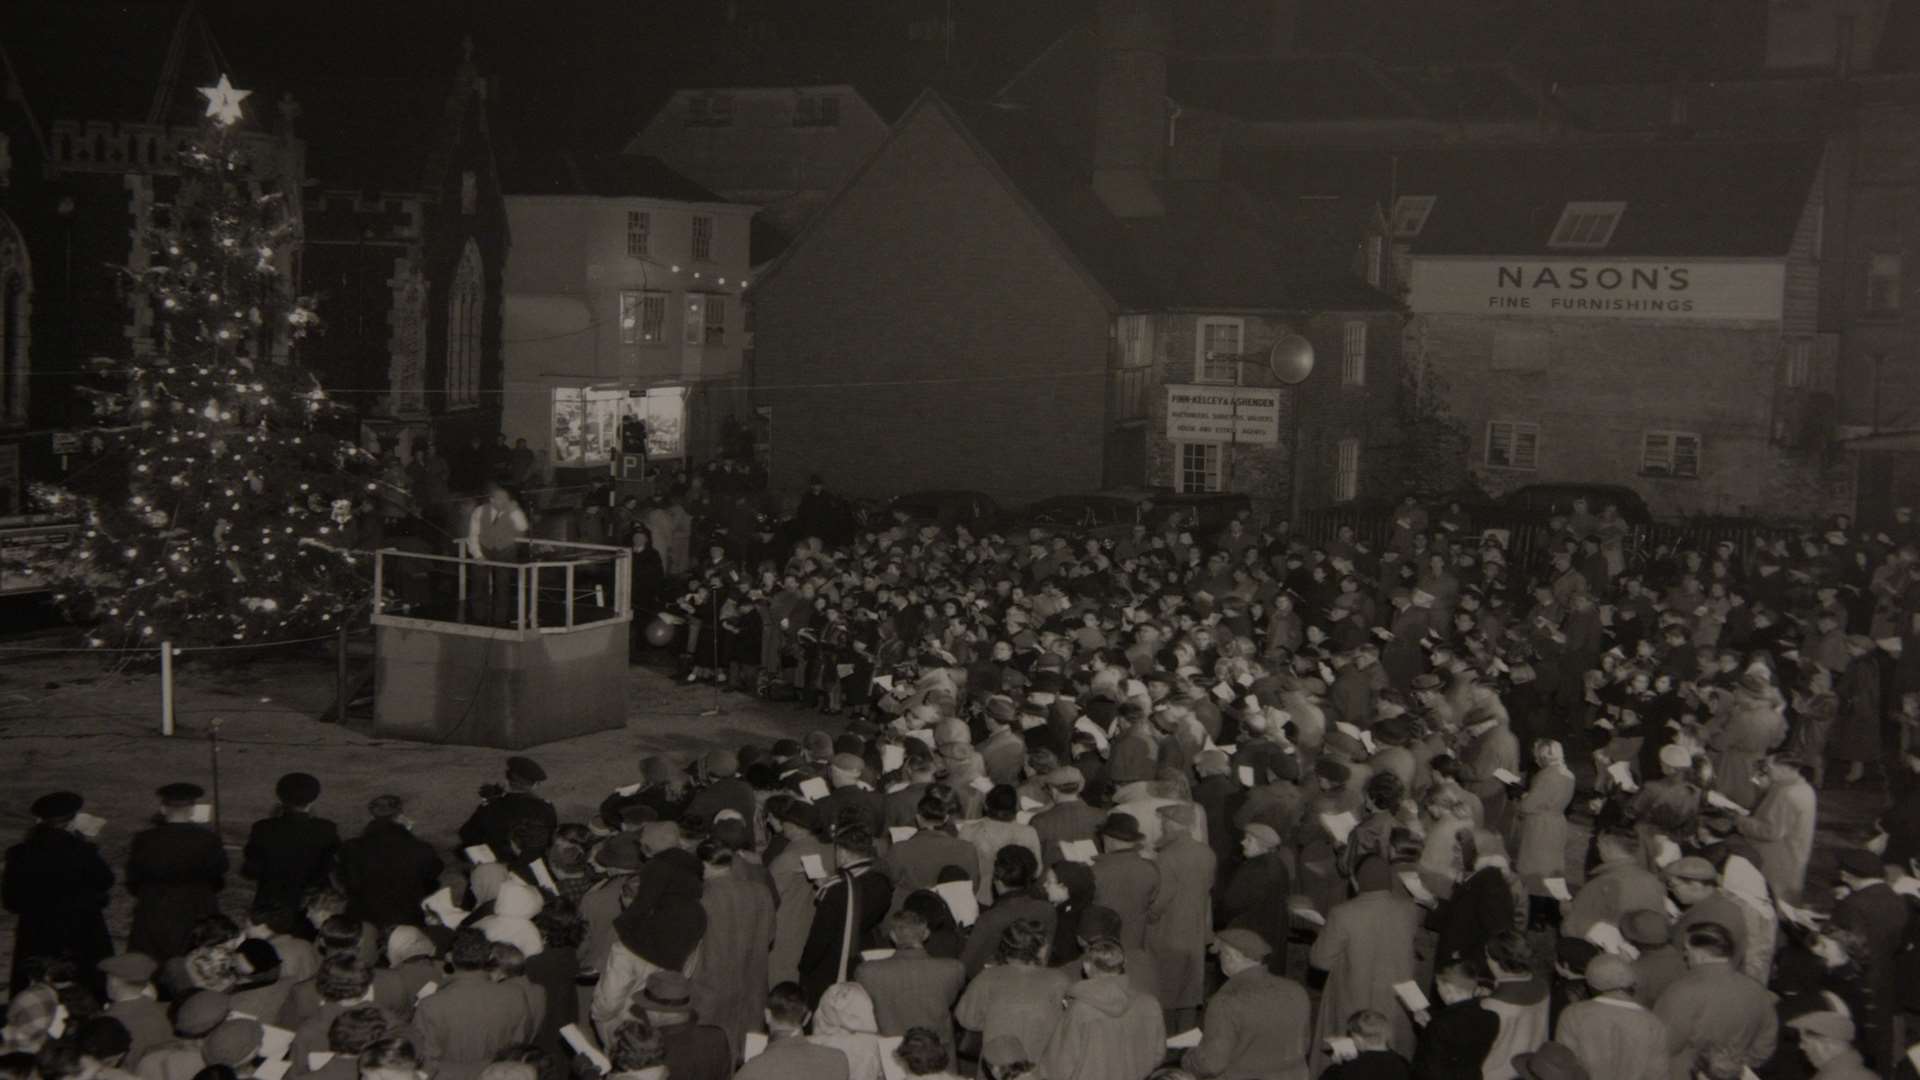 A Christmas scene from Canterbury in 1955 - carol singing around the Christmas tree in the Marlowe Theatre car park on Christmas Eve, when the Archbishop, Dr Geoffrey Fisher, gave the blessing.